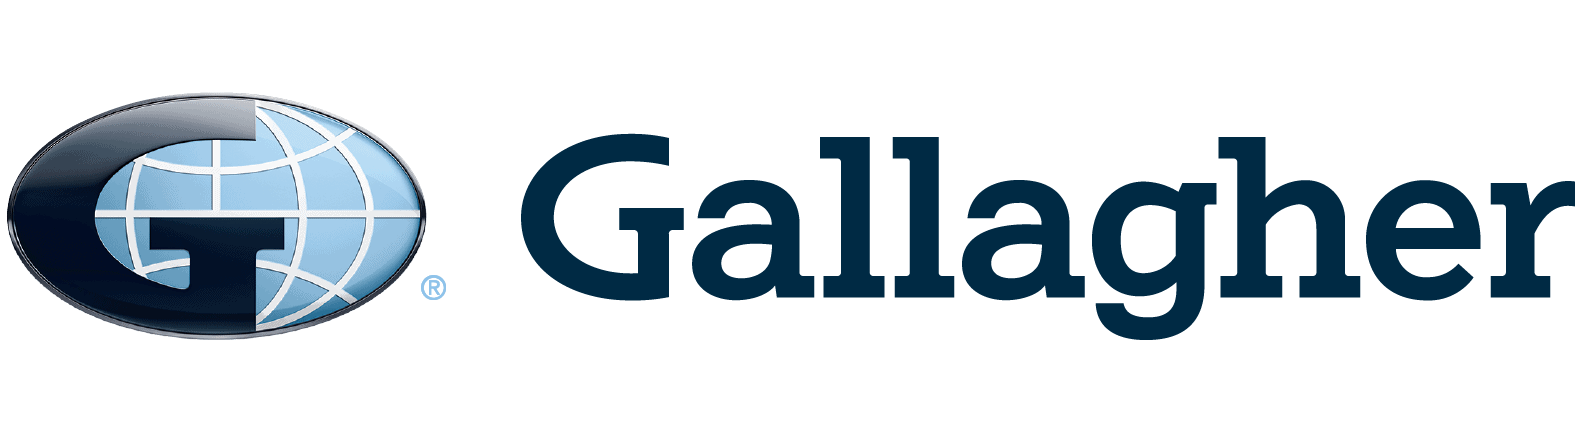 Gallagher Logo png